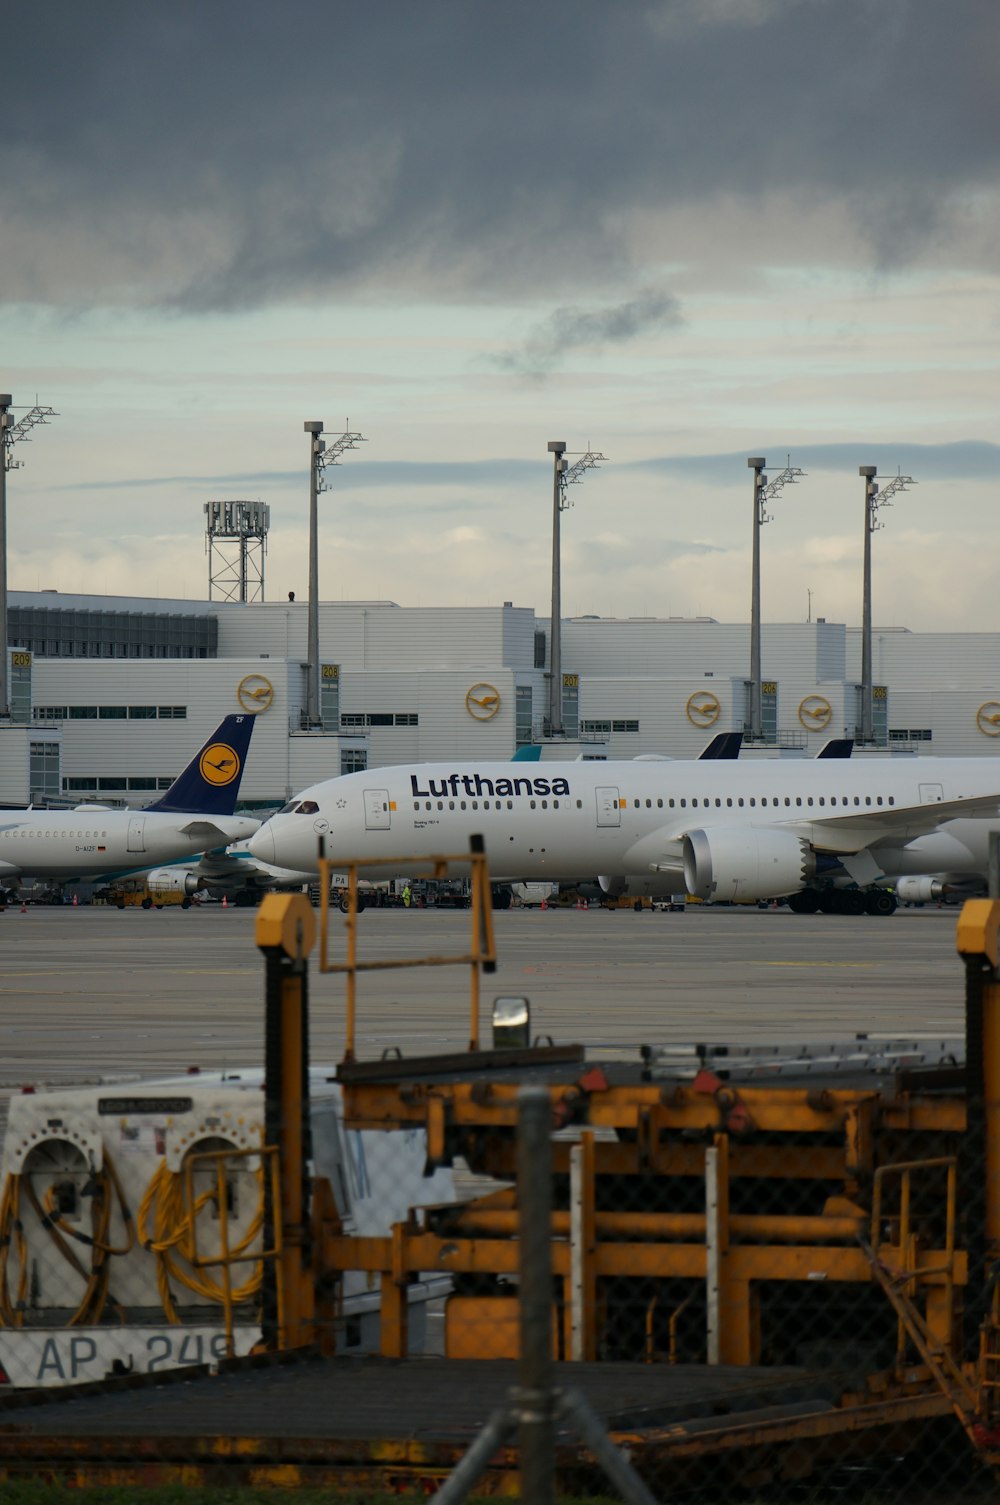 a couple of airplanes at an airport